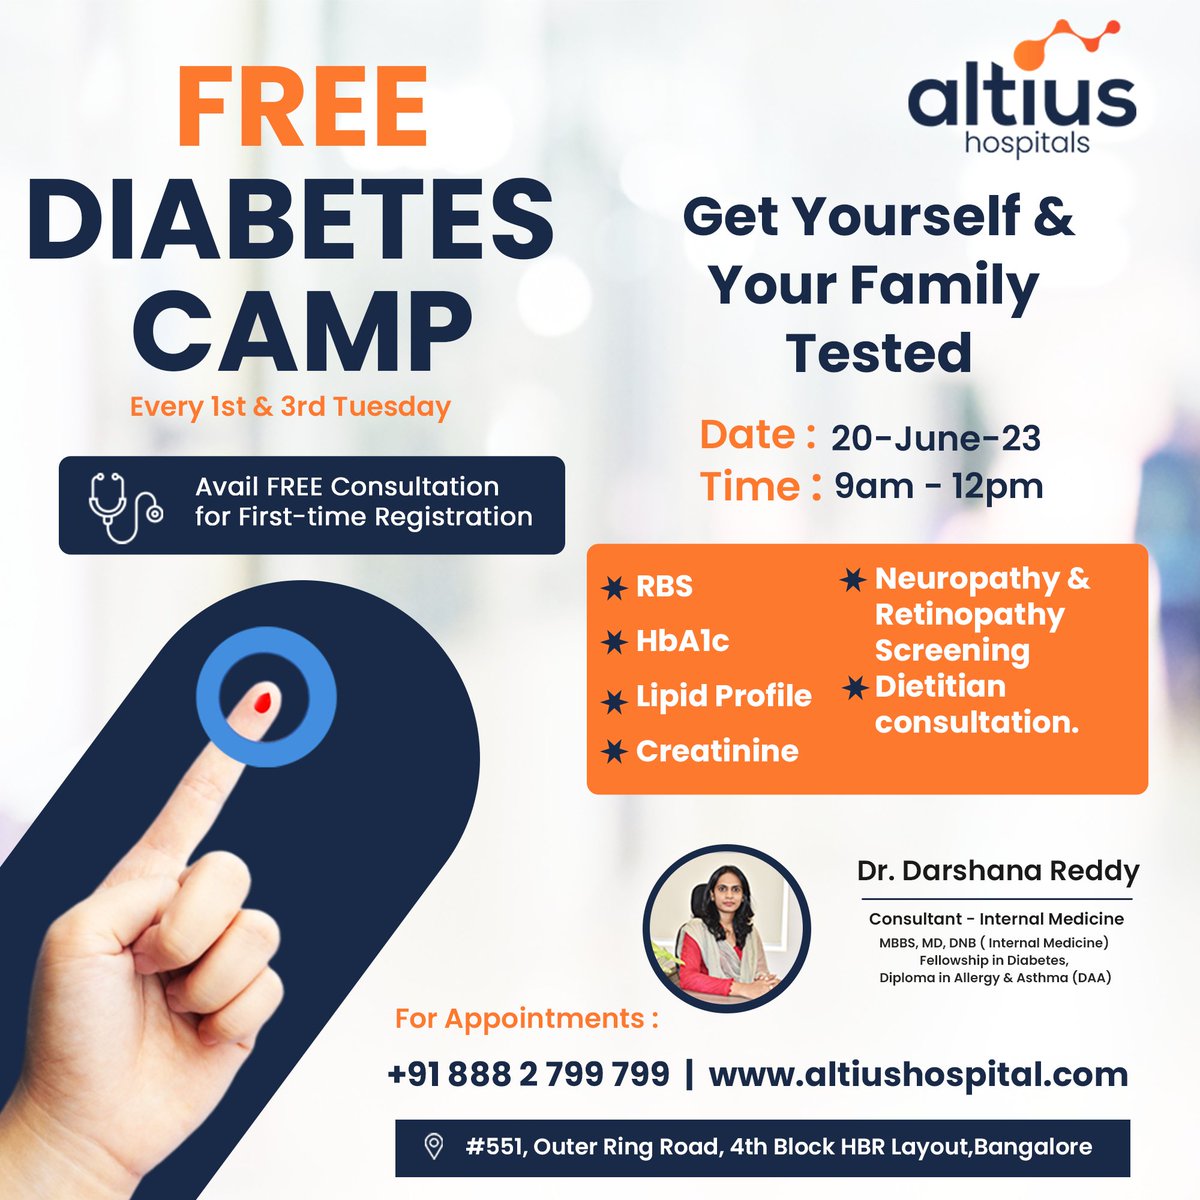 📣 Join us at Altius Hospitals for a FREE Diabetes Camp on June 20th, '23, from 9 am to 12 pm! 🩺

Book Your Appointment Now : altiushospital.com/doctors/dr-dar…
Call : 888 2 799 799

#AltiusHospitals #DiabetesCamp #HealthierTogether #DiabetesAwareness